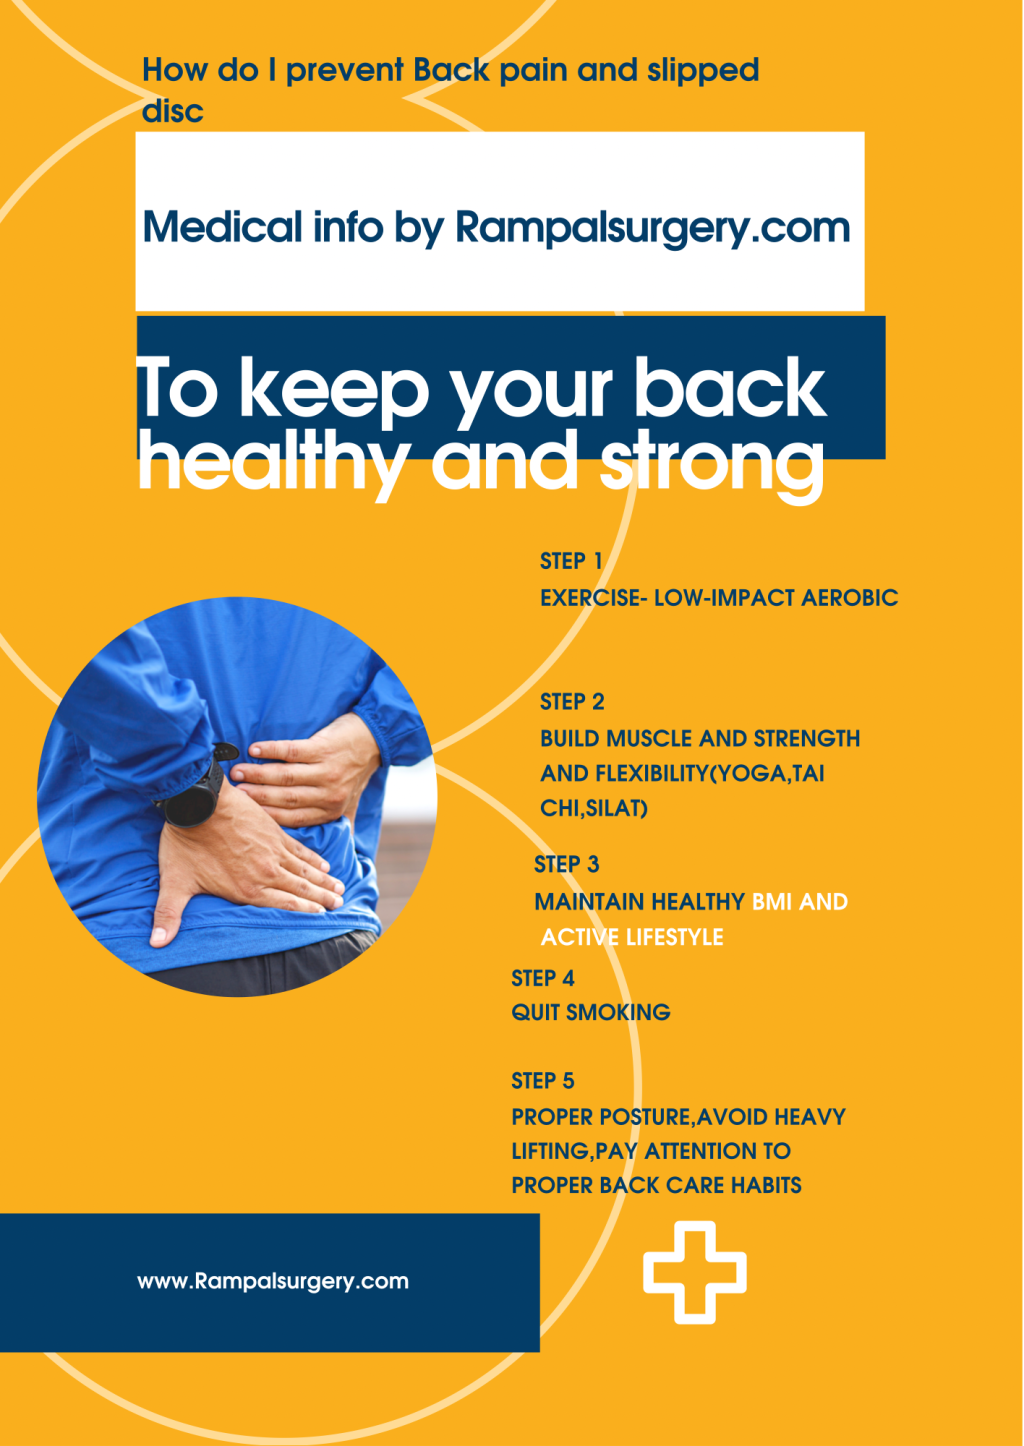 How do I prevent Back Pain and Slipped Disc by Dr Sanjiv Rampal of Rampalsurgery Kuala Lumpur